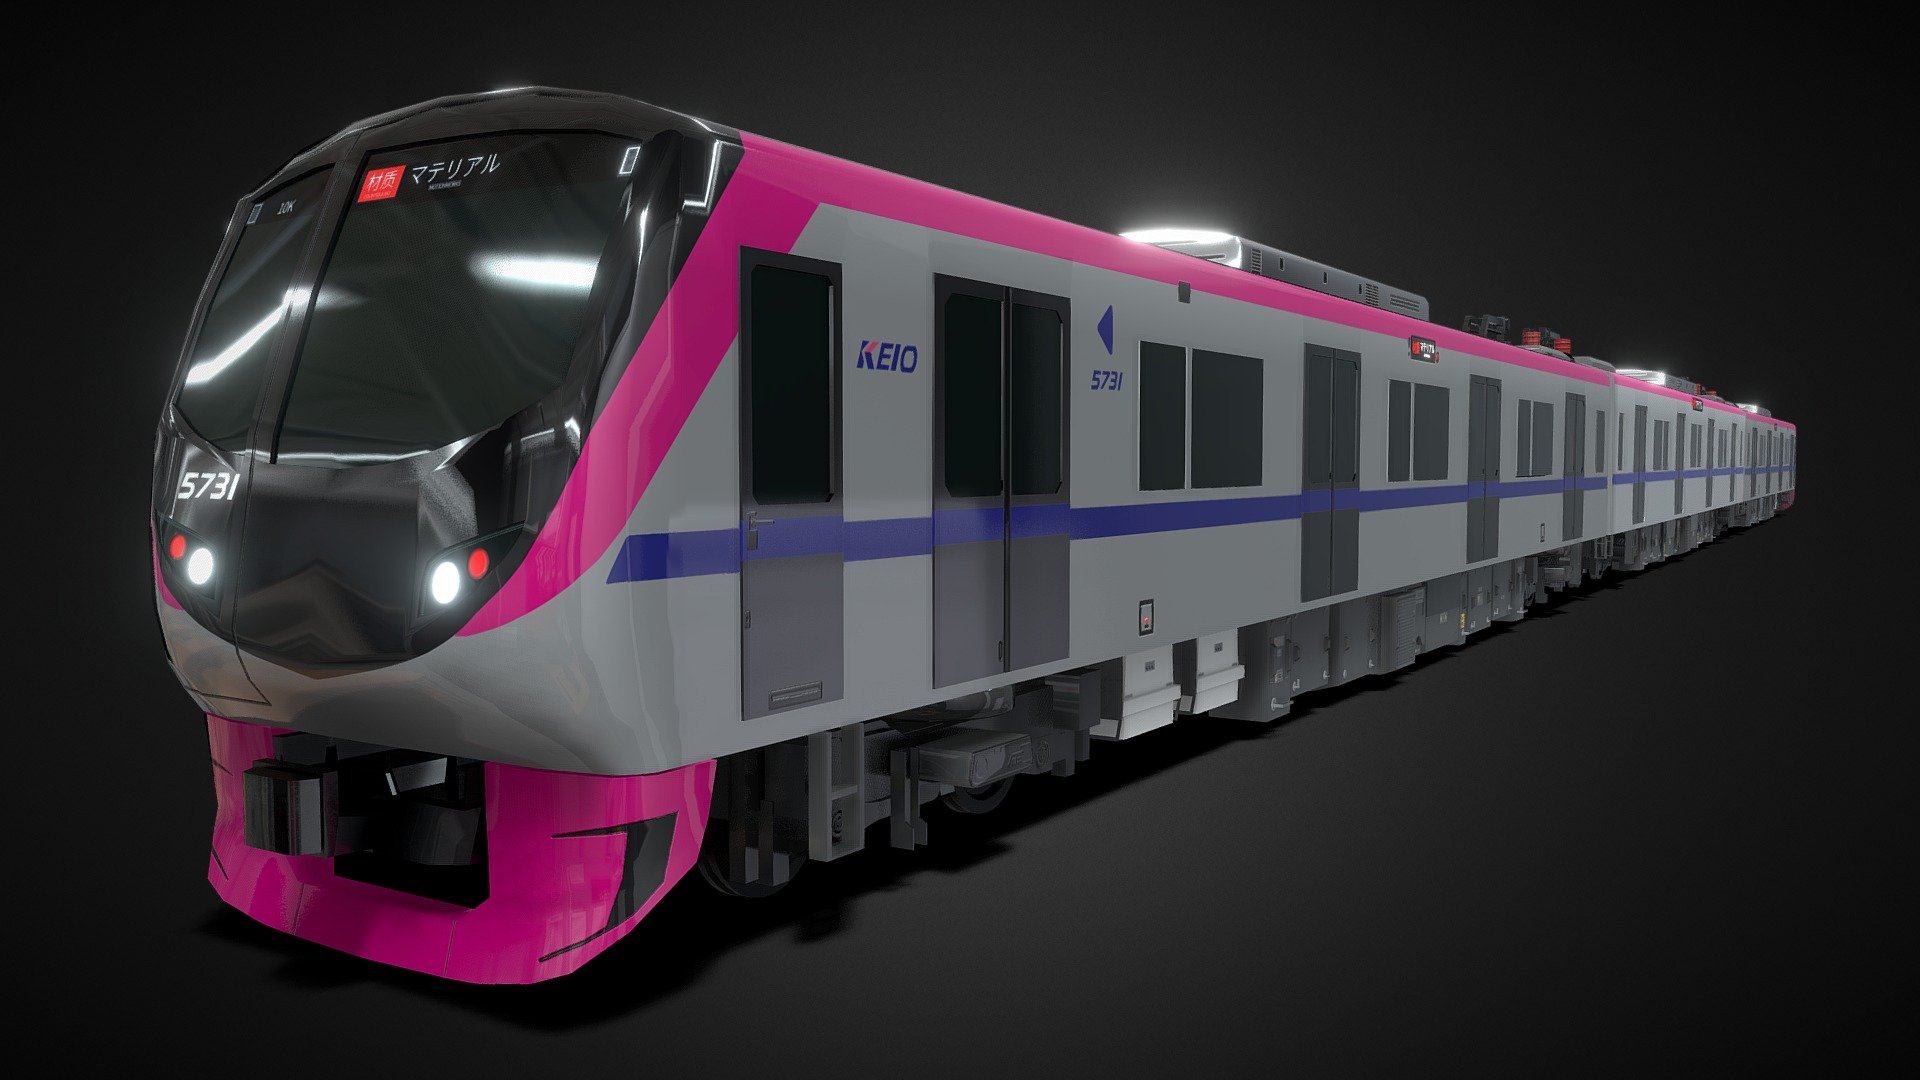 Keio 5000 Series Commuter Train
Train based commuter train that service in keio liner.
I like this train because this train little bit different in color sceme - Keio 5000 Series Commuter Train - Buy Royalty Free 3D model by VenomizerX (@vimardimd11) 3d model